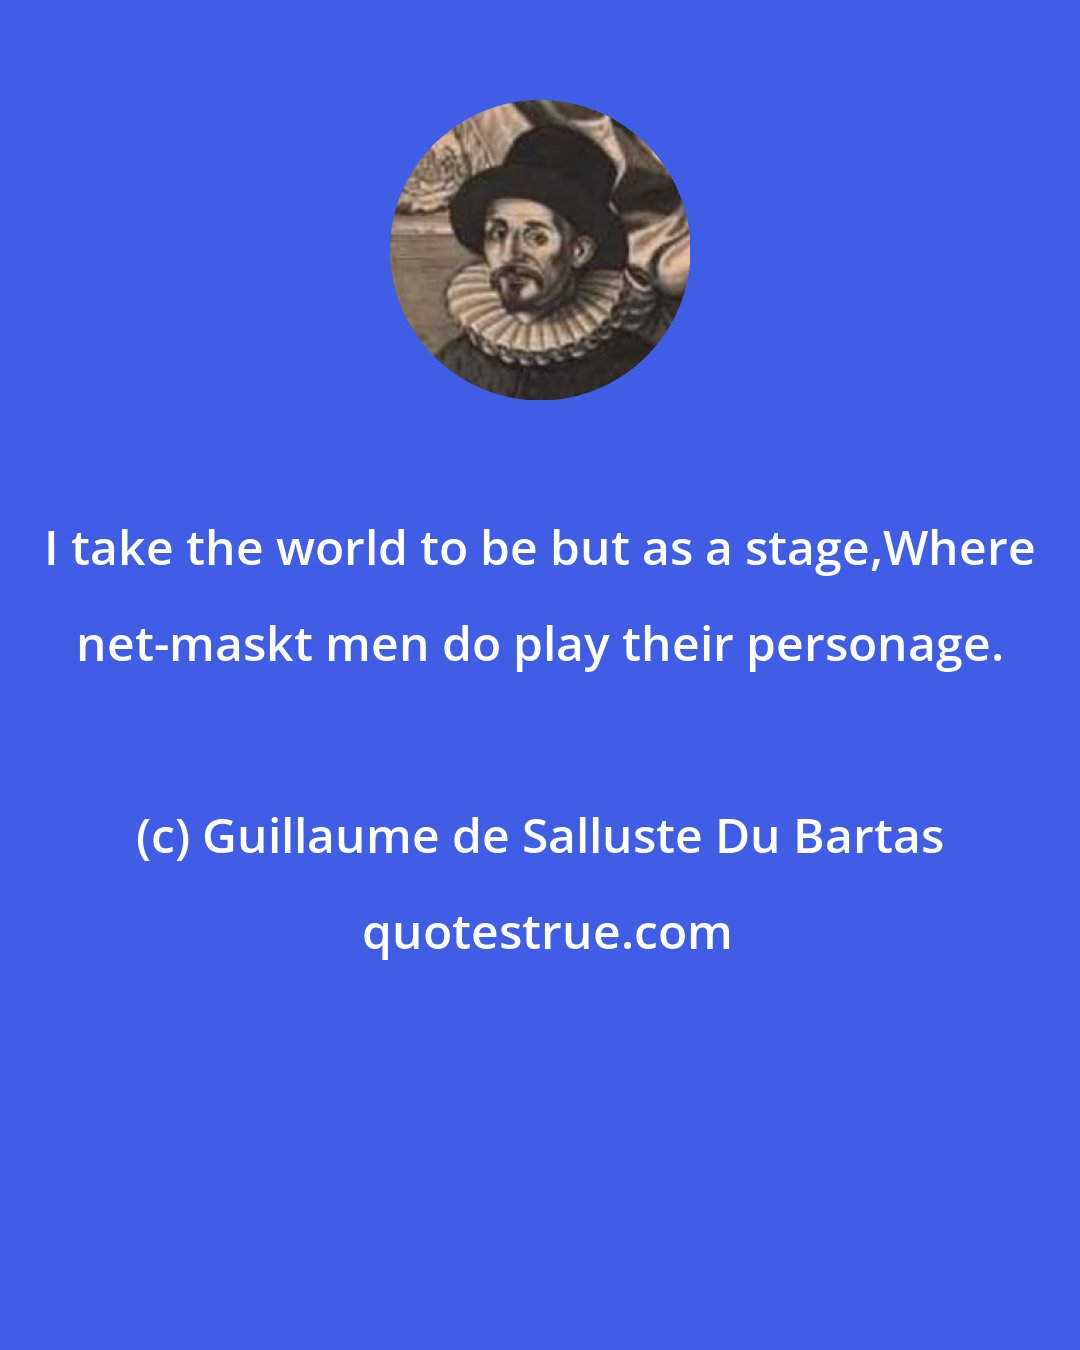 Guillaume de Salluste Du Bartas: I take the world to be but as a stage,Where net-maskt men do play their personage.